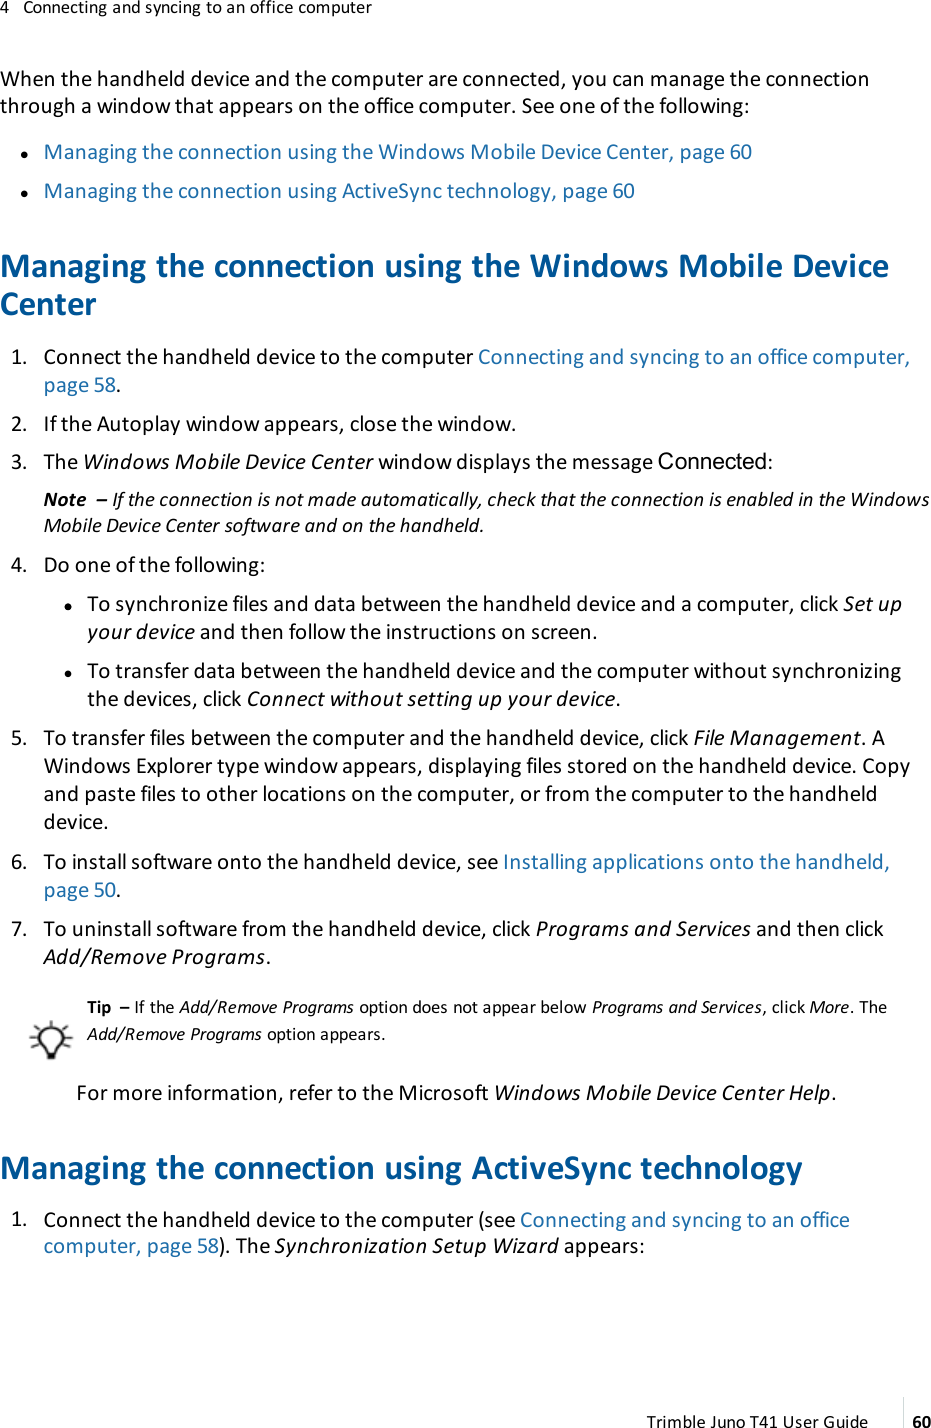 4 Connecting and syncing to an office computerWhen the handheld device and the computer are connected, you can manage the connectionthrough a window that appears on the office computer. See one of the following:lManaging the connection using the Windows Mobile Device Center, page 60lManaging the connection using ActiveSync technology, page 60Managing the connection using the Windows Mobile DeviceCenter1. Connect the handheld device to the computer Connecting and syncing to an office computer,page 58.2. If the Autoplay window appears, close the window.3. The Windows Mobile Device Center window displays the message Connected:Note – If the connection is not made automatically, check that the connection is enabled in the WindowsMobile Device Center software and on the handheld.4. Do one of the following:ll To synchronize files and data between the handheld device and a computer, click Set upyour device and then follow the instructions on screen.lTo transfer data between the handheld device and the computer without synchronizingthe devices, click Connect without setting up your device.5. To transfer files between the computer and the handheld device, click File Management. AWindows Explorer type window appears, displaying files stored on the handheld device. Copyand paste files to other locations on the computer, or from the computer to the handhelddevice.6. To install software onto the handheld device, see Installing applications onto the handheld,page 50.7. To uninstall software from the handheld device, click Programs and Services and then clickAdd/Remove Programs.Tip – If the Add/Remove Programs option does not appear below Programs and Services, click More. TheAdd/Remove Programs option appears.For more information, refer to the Microsoft Windows Mobile Device Center Help.Managing the connection using ActiveSync technology1. Connect the handheld device to the computer (see Connecting and syncing to an officecomputer, page 58). The Synchronization Setup Wizard appears:Trimble Juno T41 User Guide 60